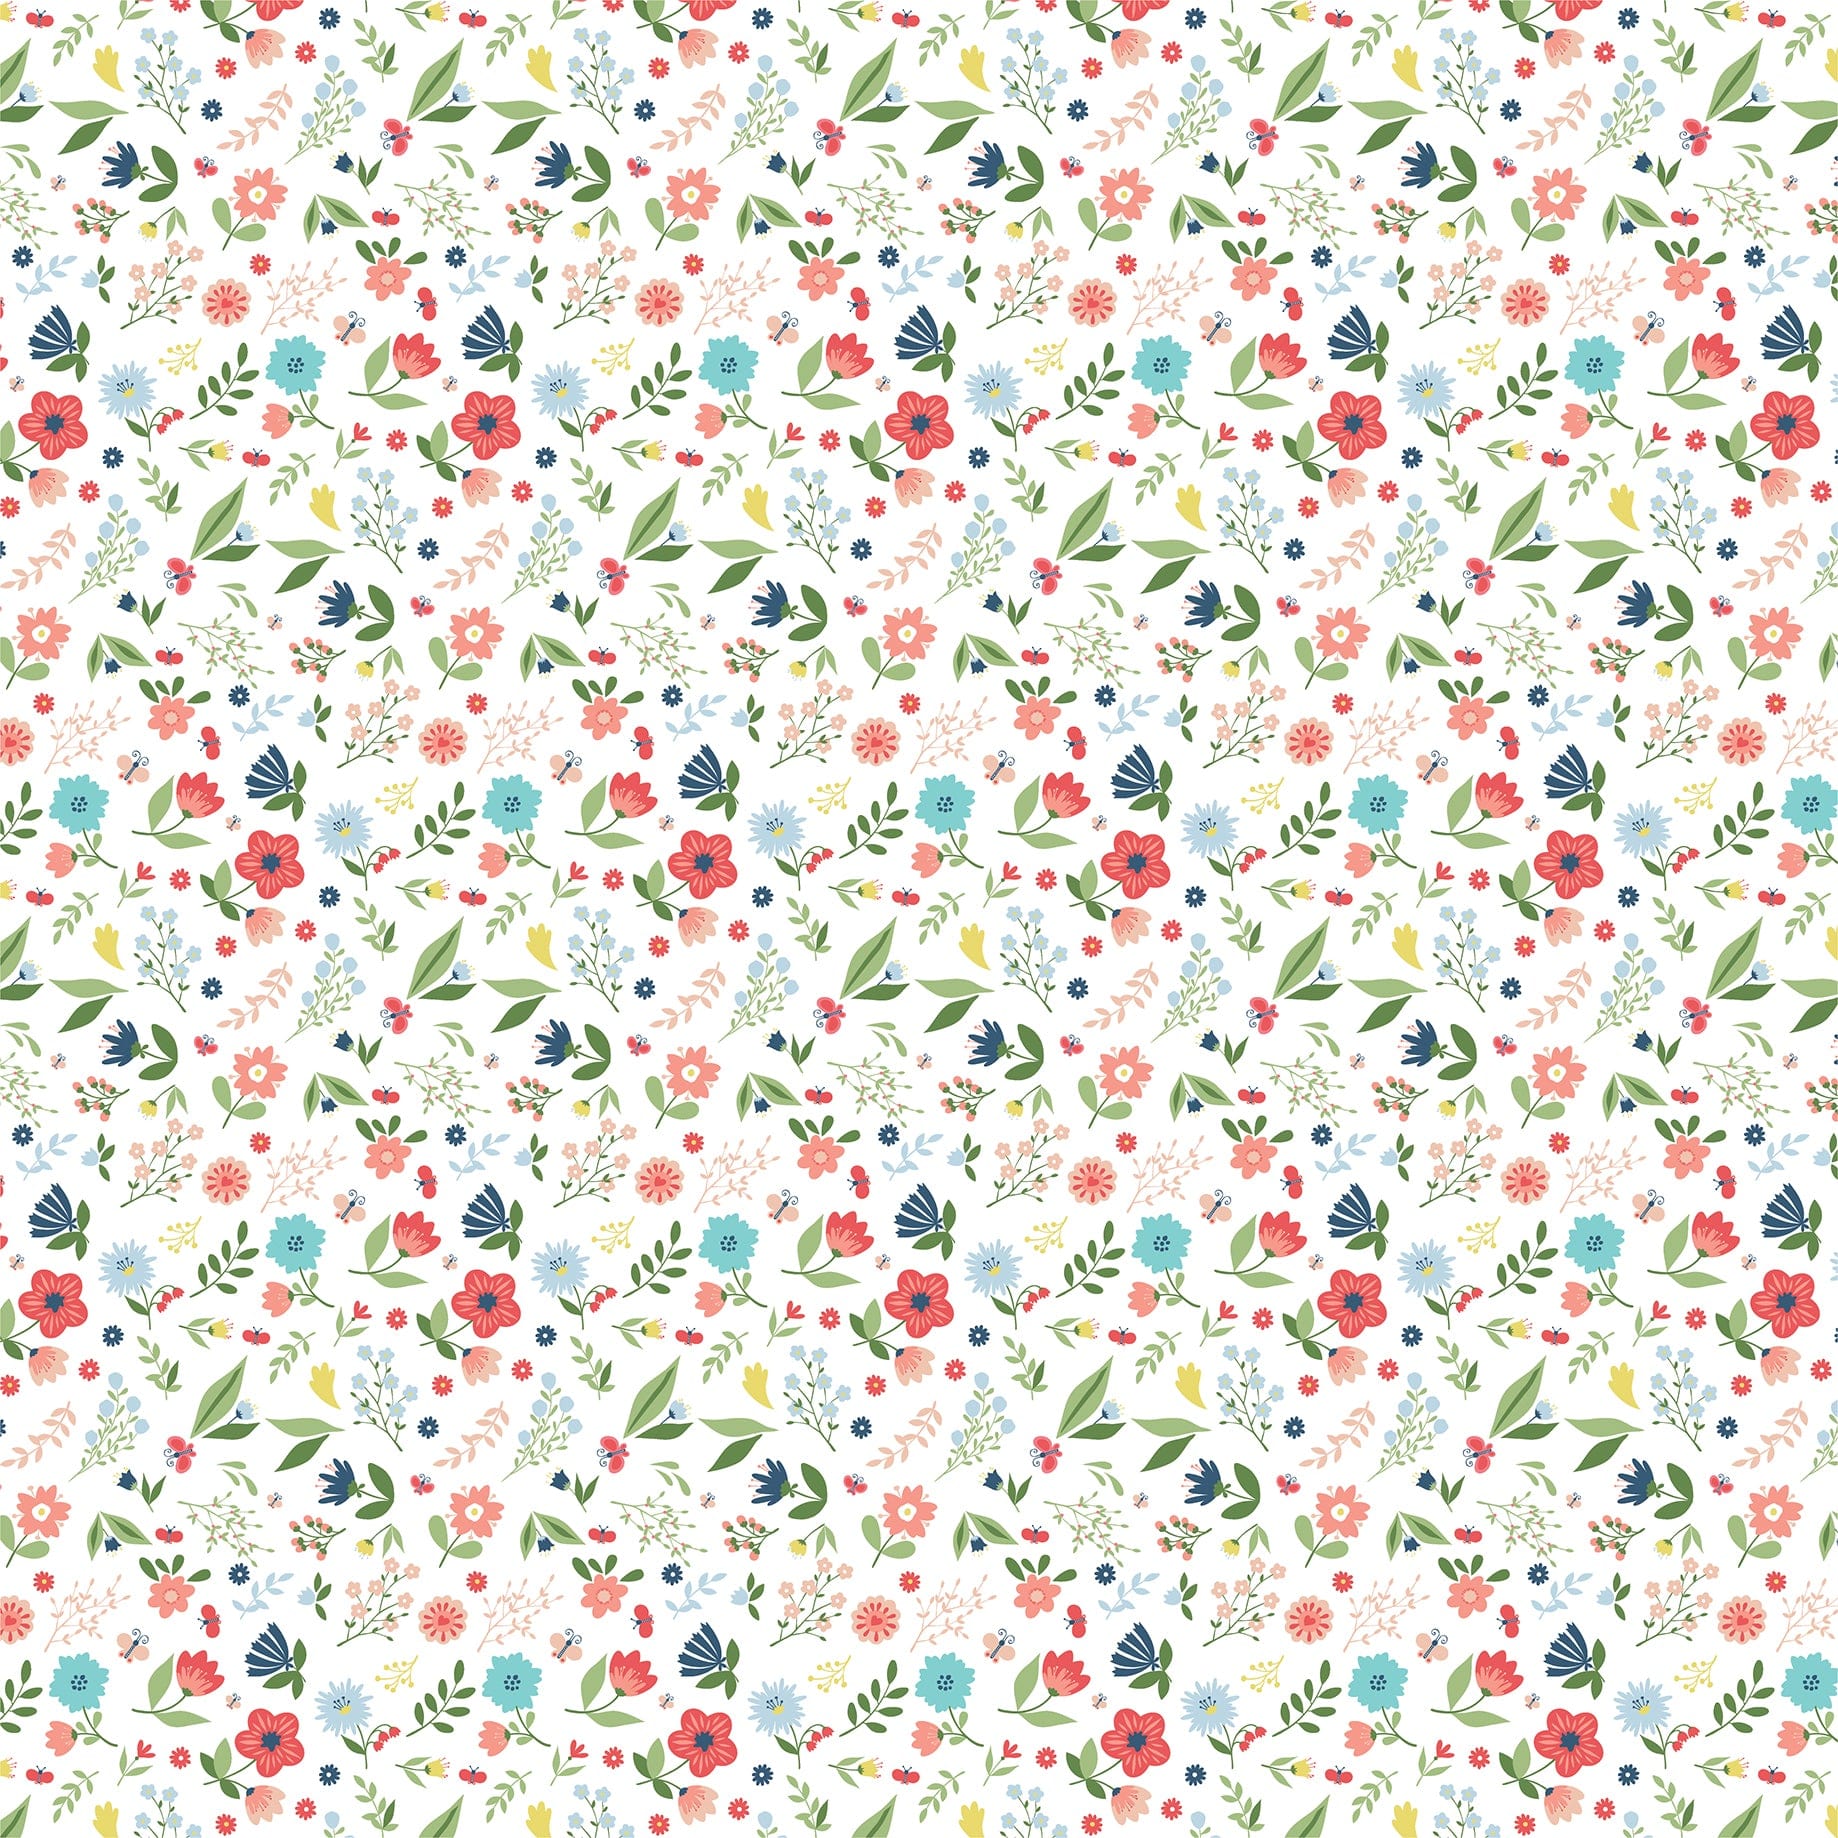 Little Dreamer Girl Collection Pocketful of Posies 12 x 12 Double-Sided Scrapbook Paper by Echo Park Paper